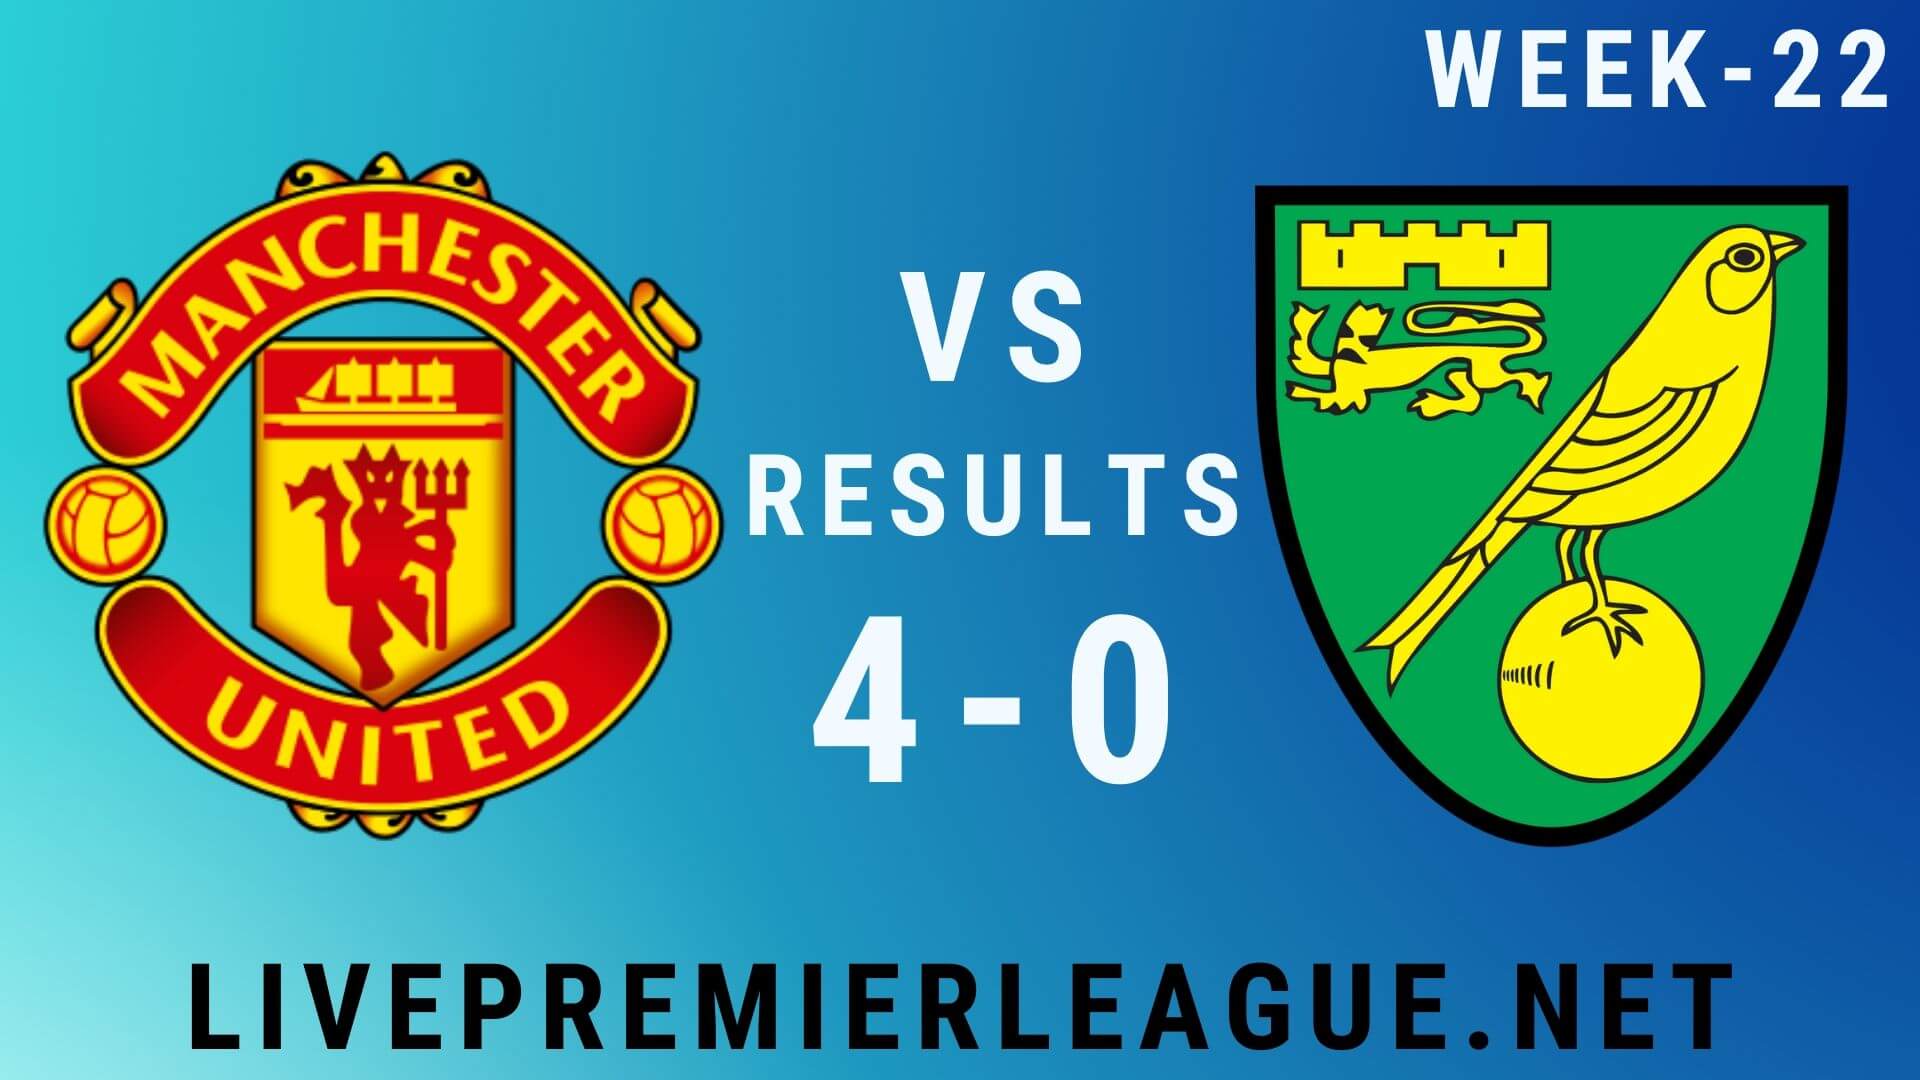 Manchester United Vs Norwich City | Week 22 Result 2020